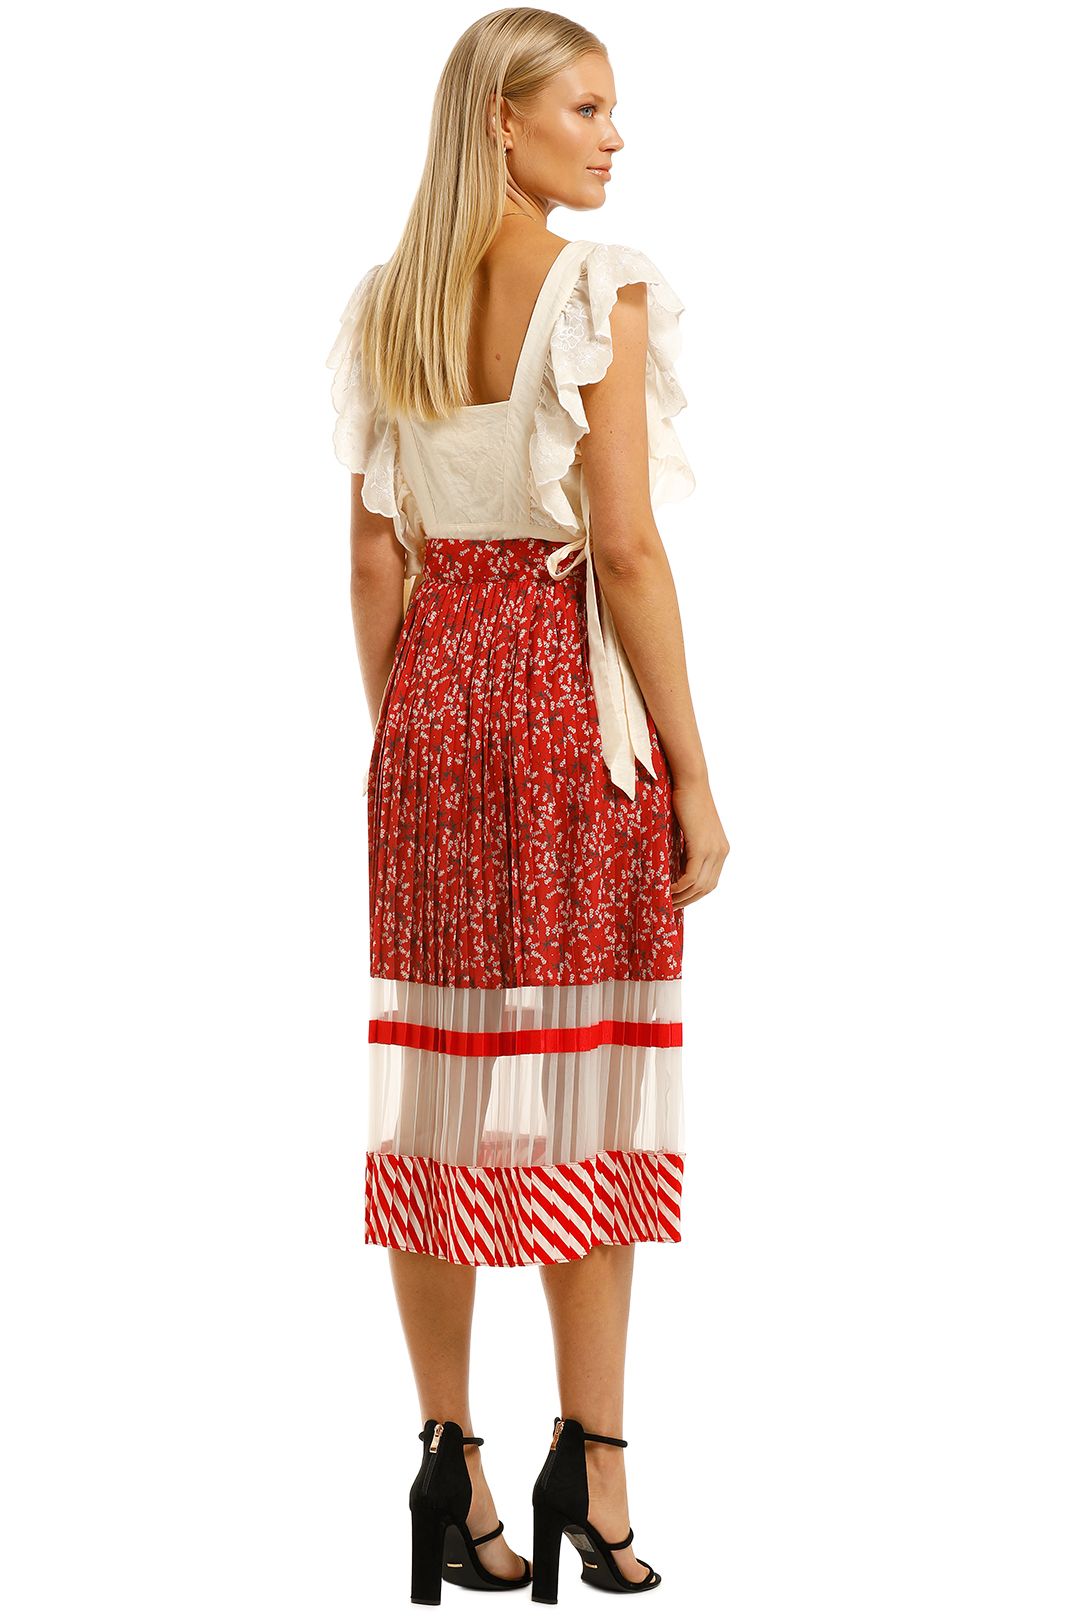 Hot Pleat Skirt In Red By Curate By Trelise Cooper For Hire Glamcorner 9075